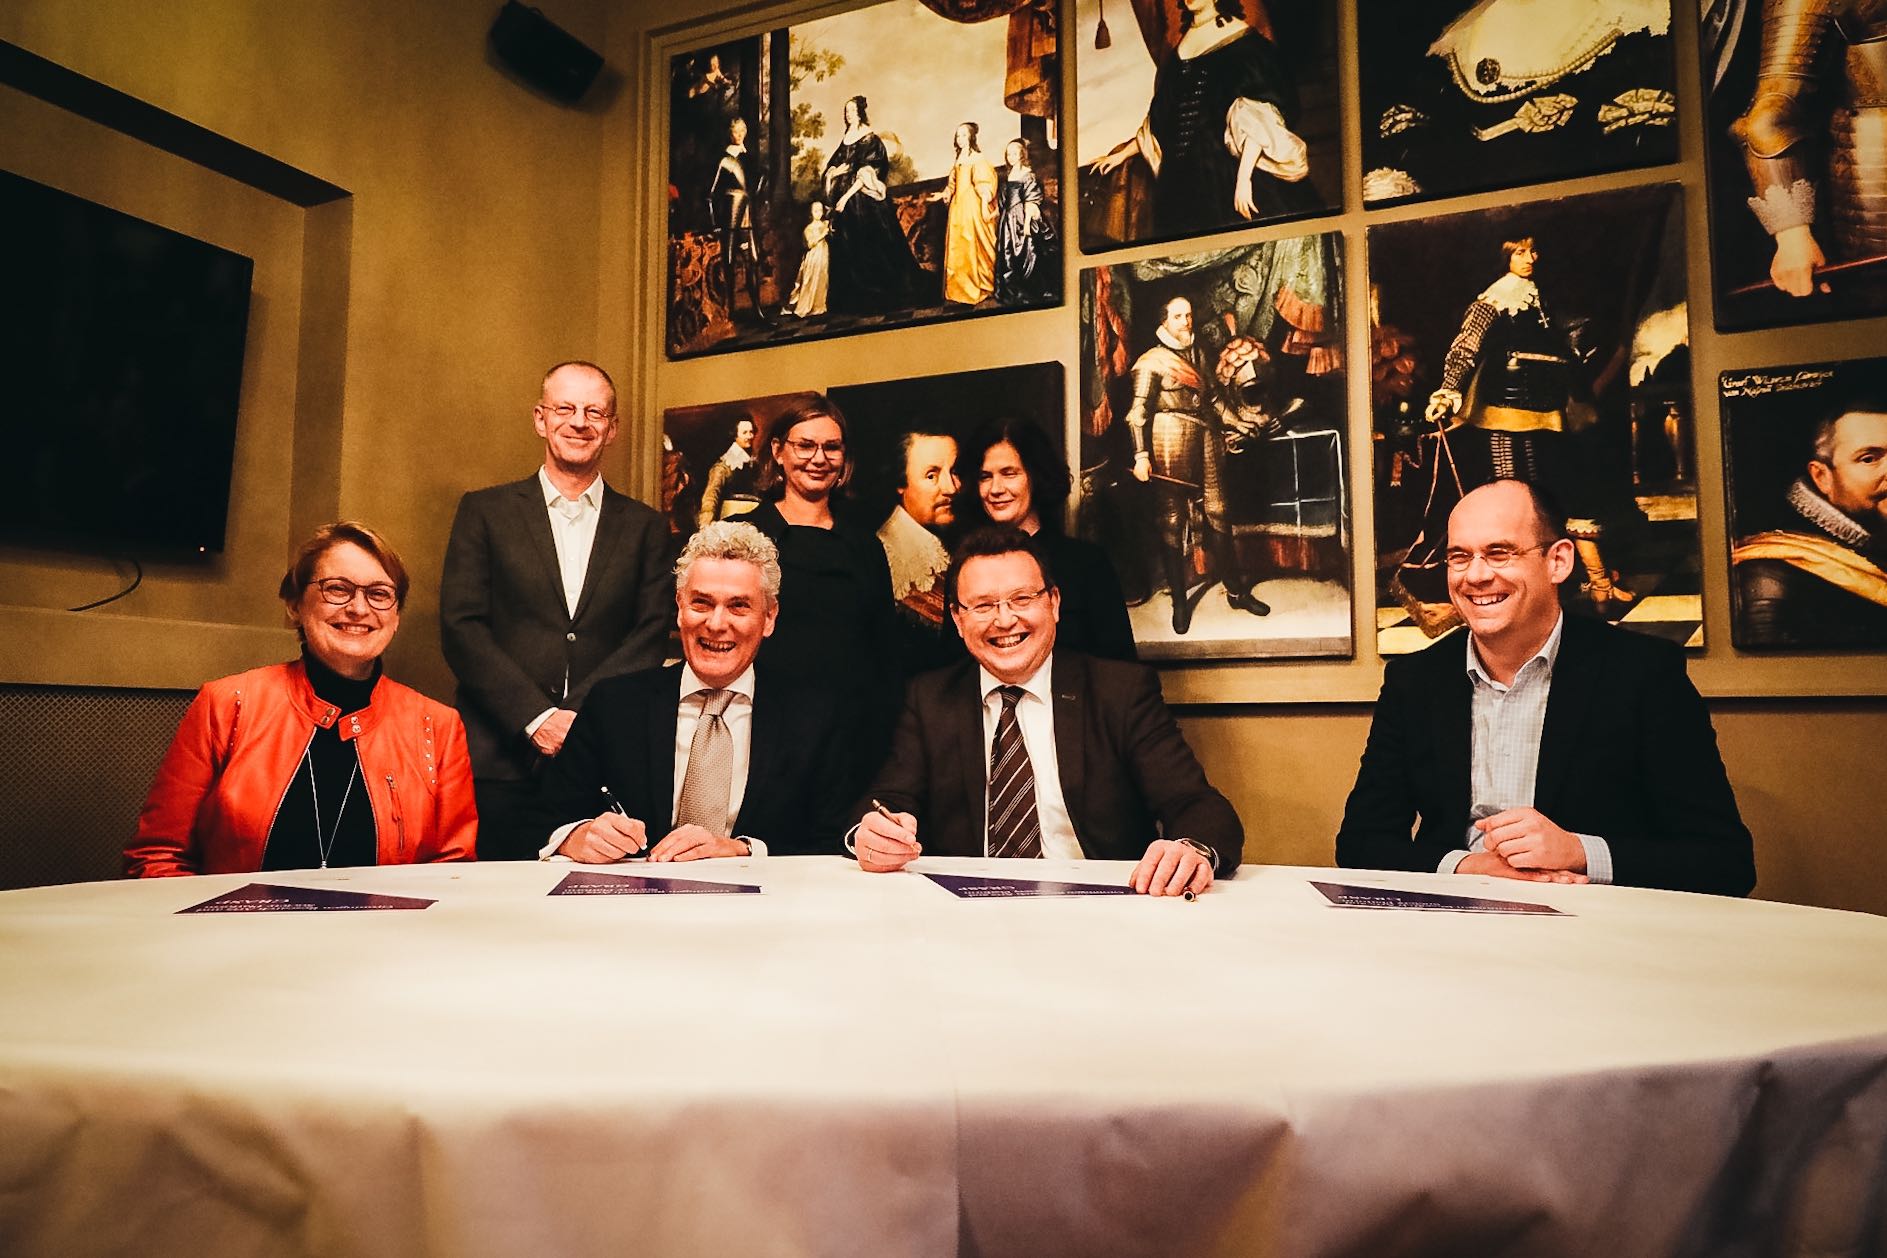 The members of the Board of the University of Groningen (UG) and of the Executive Board of Hanze University of Applied Sciences (Hanze UAS) signing a covenant to commit to this collaboration.